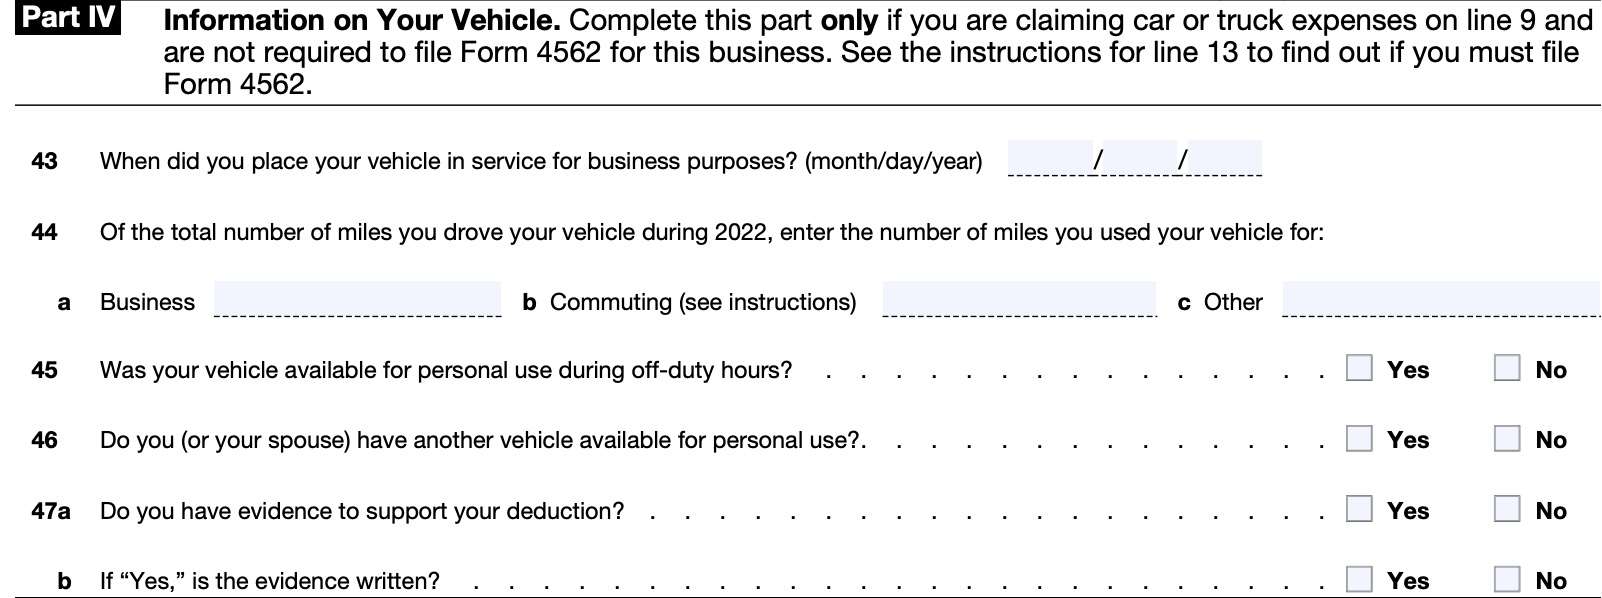 Part IV: Information on your Vehicle